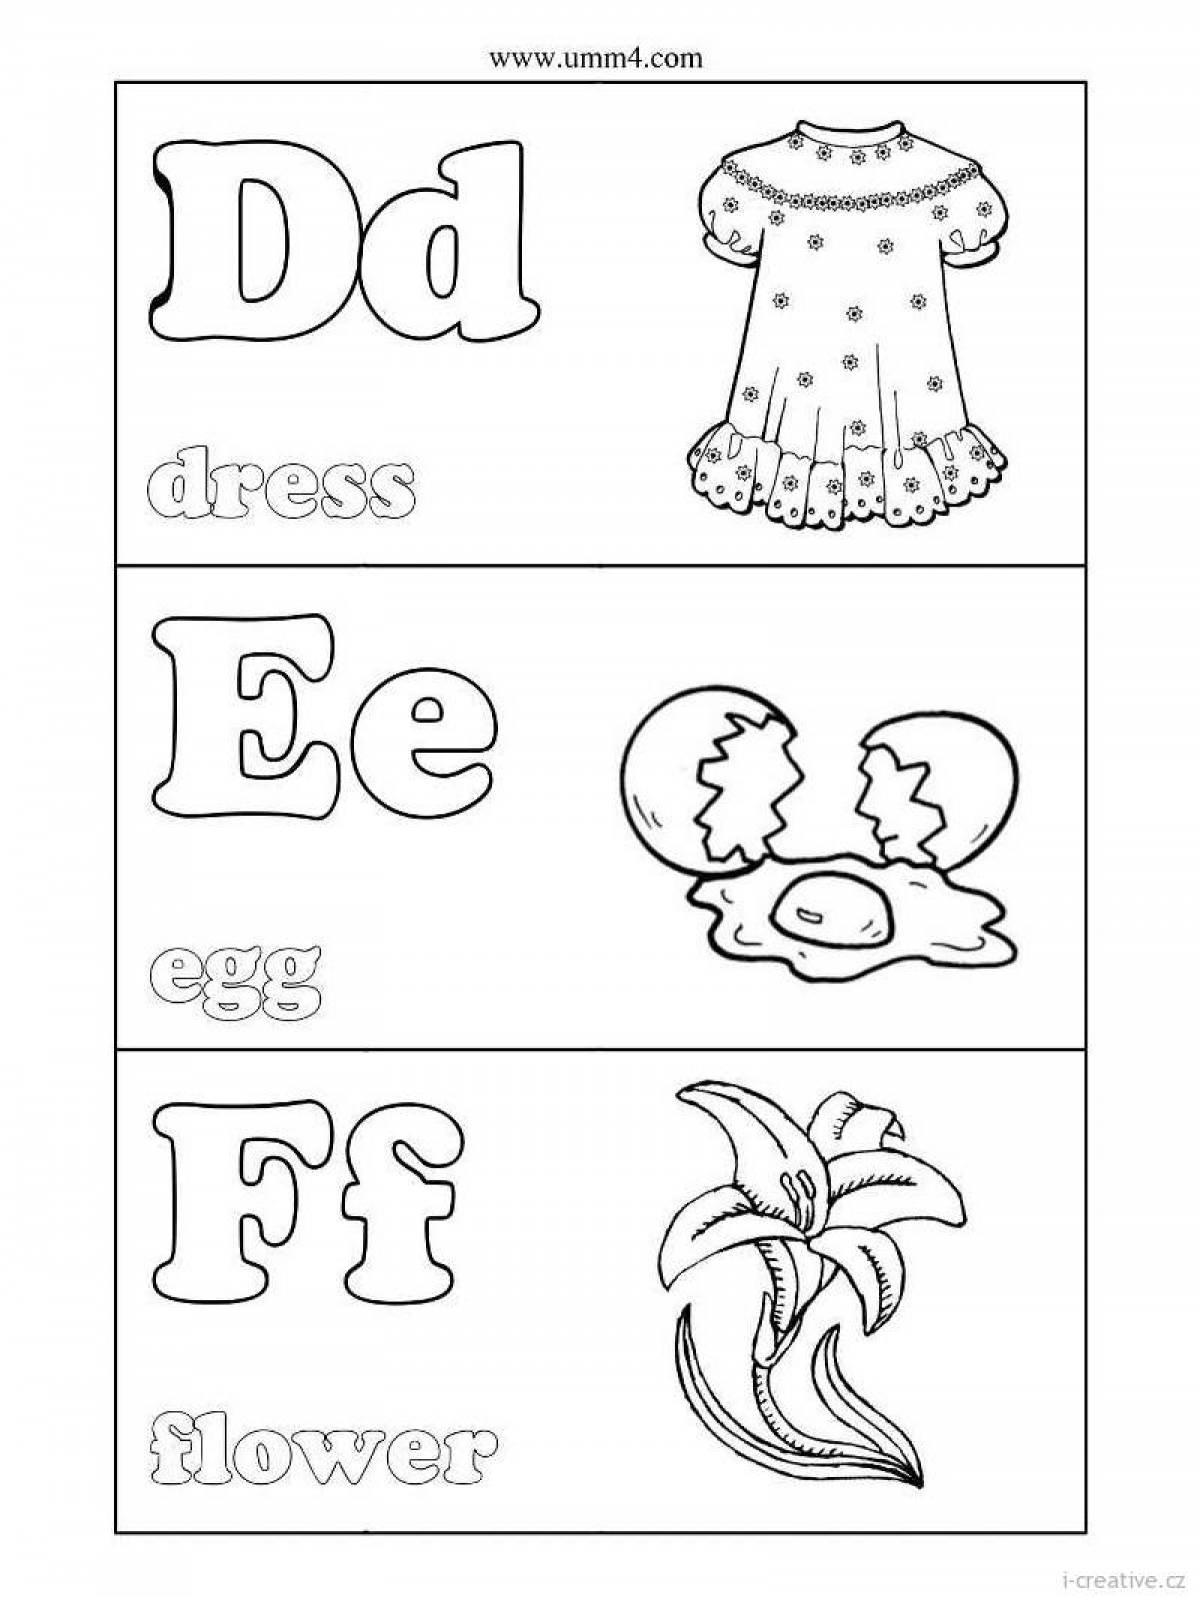 English alphabet in pictures #4